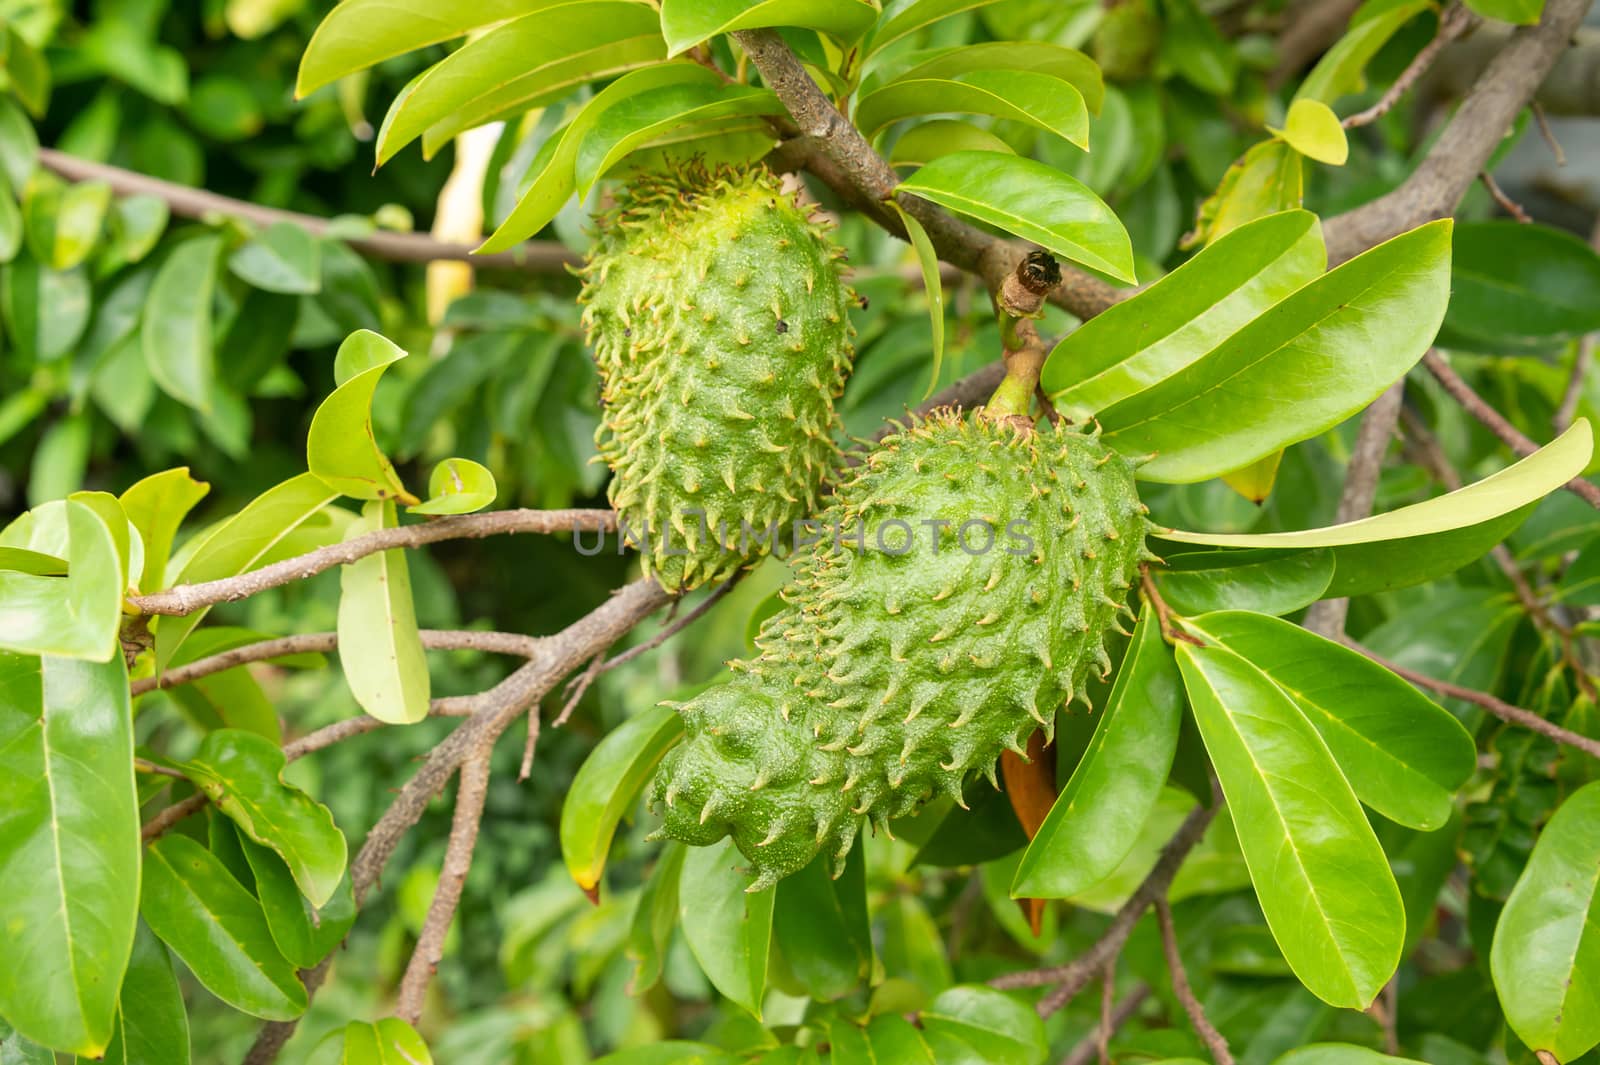 Soursop fruits on their trees by mbruxelle